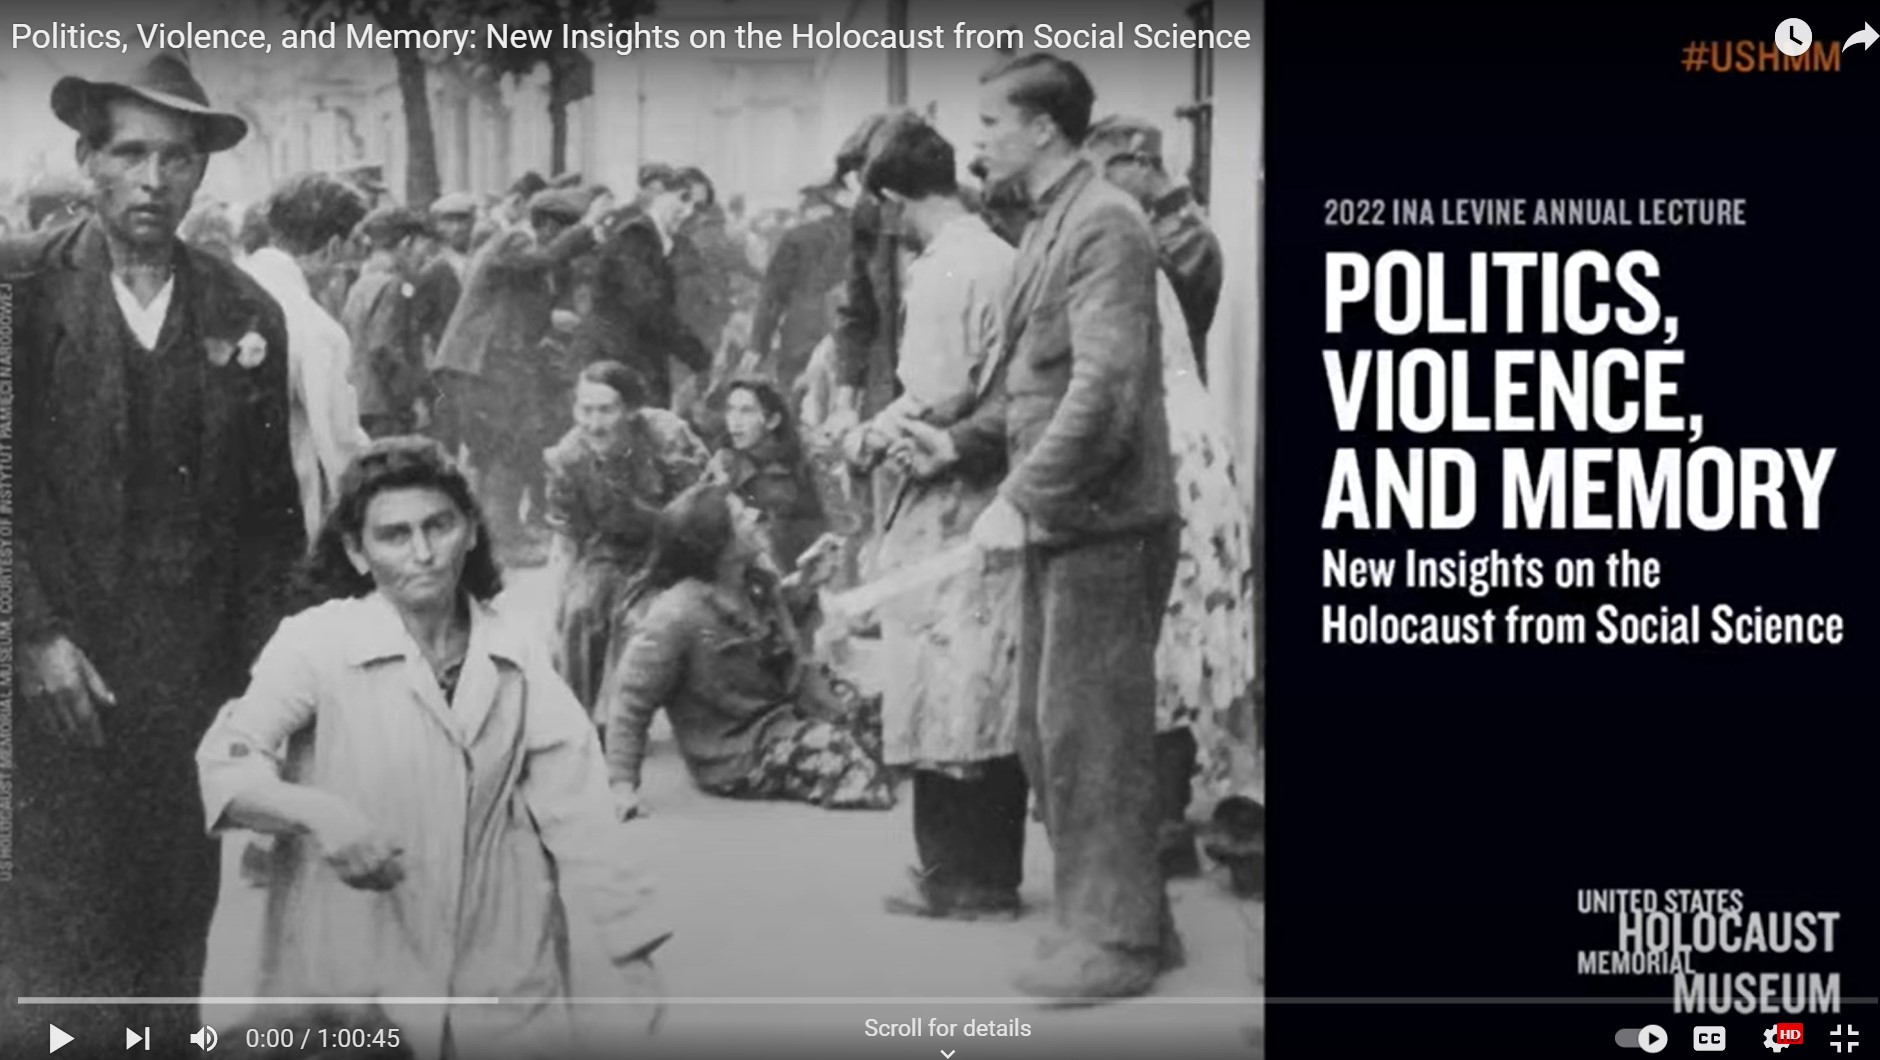 Watch the Talk: Insights on the Holocaust from Social Science